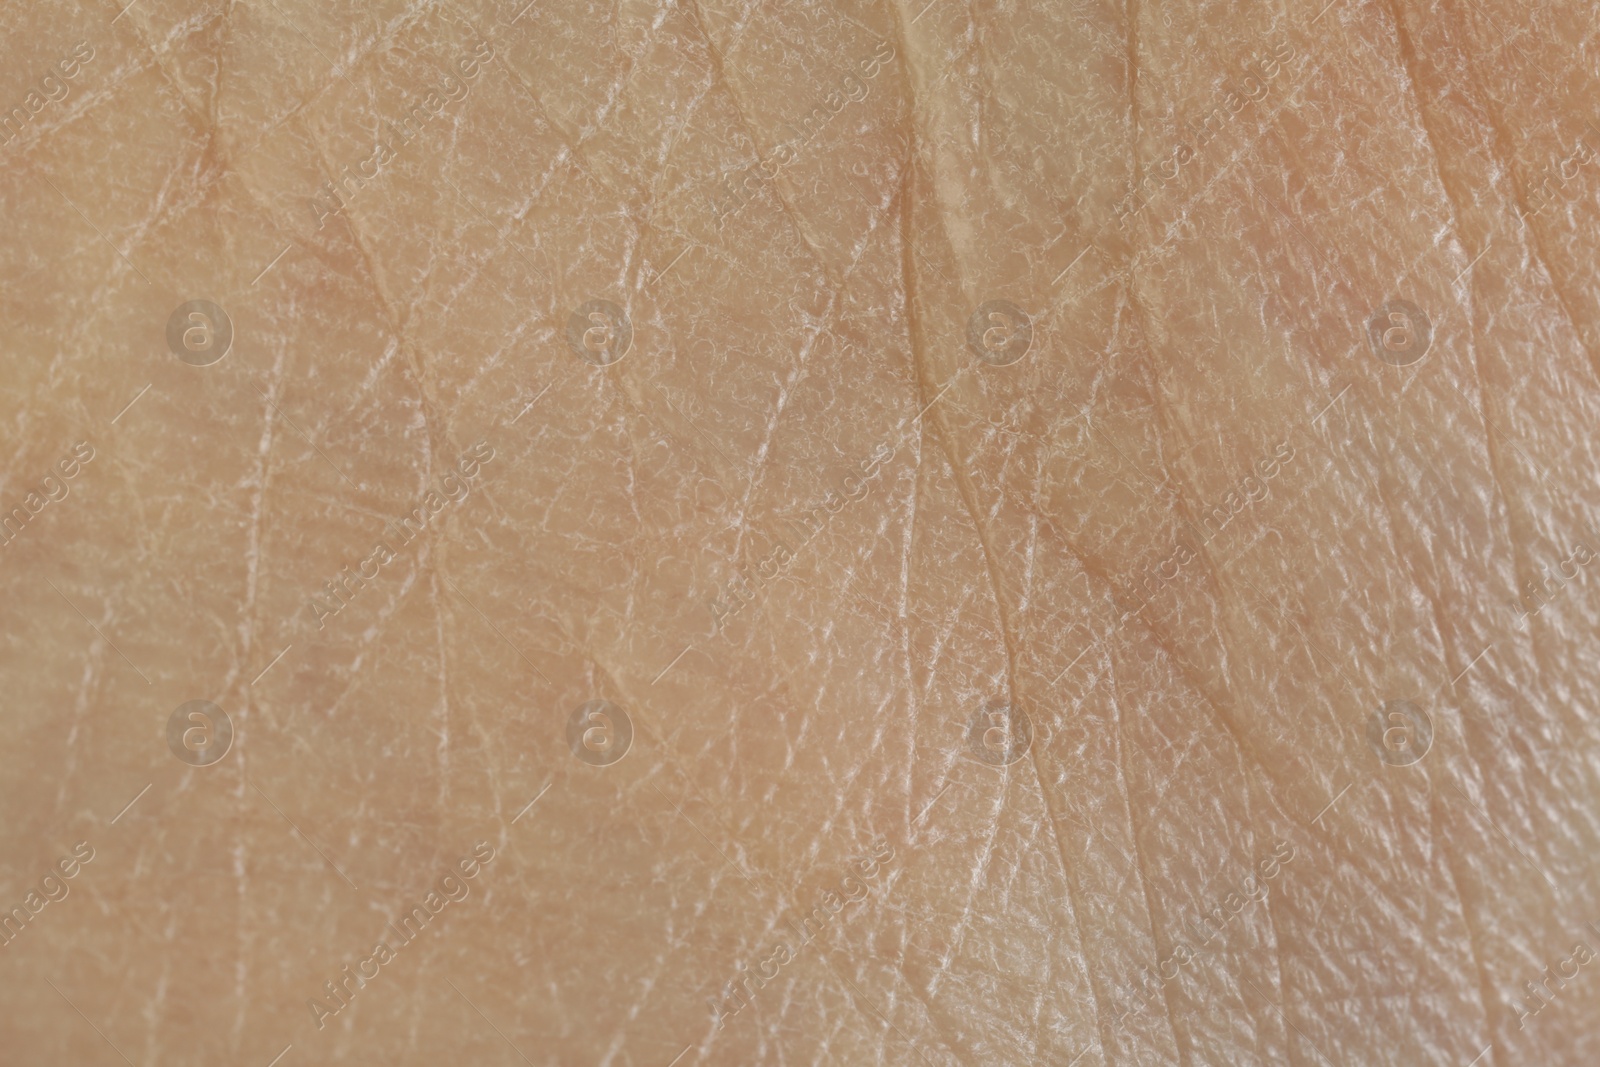 Photo of Texture of dry skin as background, macro view